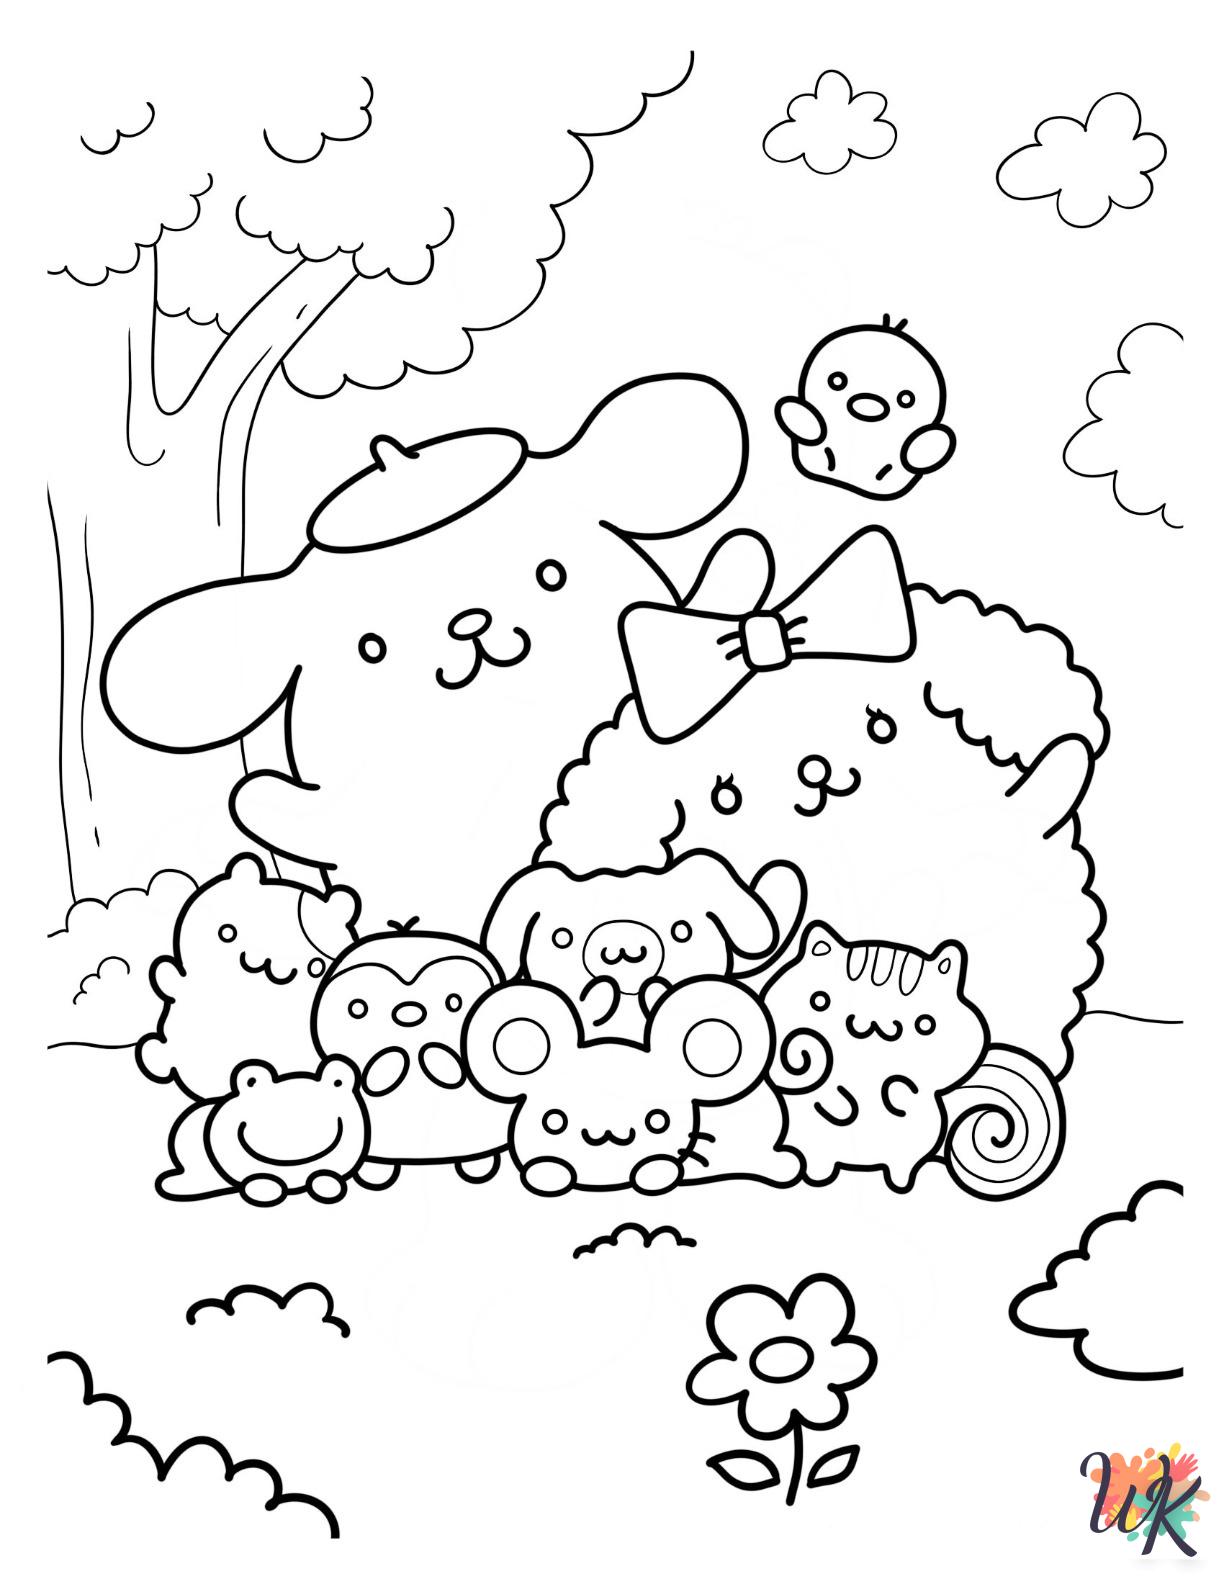 20 Pompompurin Coloring Pages For Kids - ColorinngPagesWK